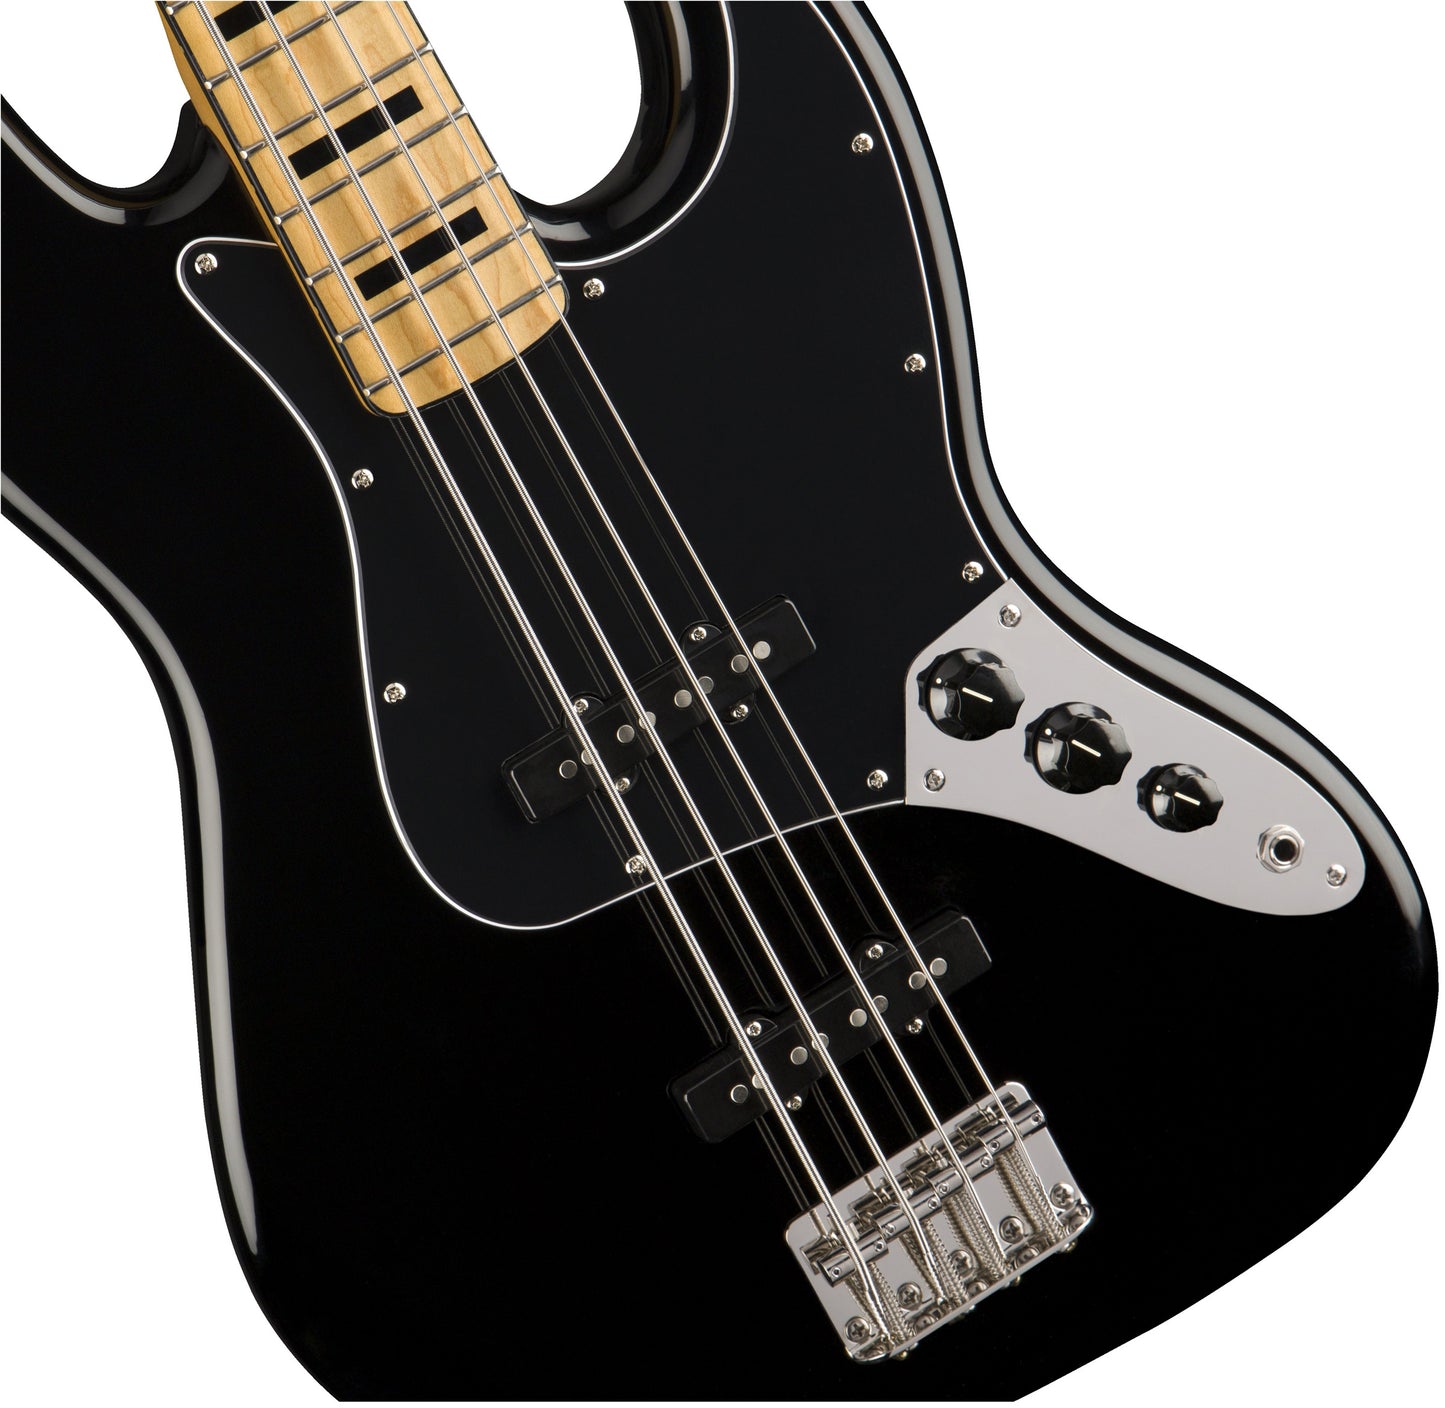 Squier by Fender Classic Vibe '70s Jazz Bass Electric Guitar with Alnico Pickups Vintage-Style Bridge (Black)